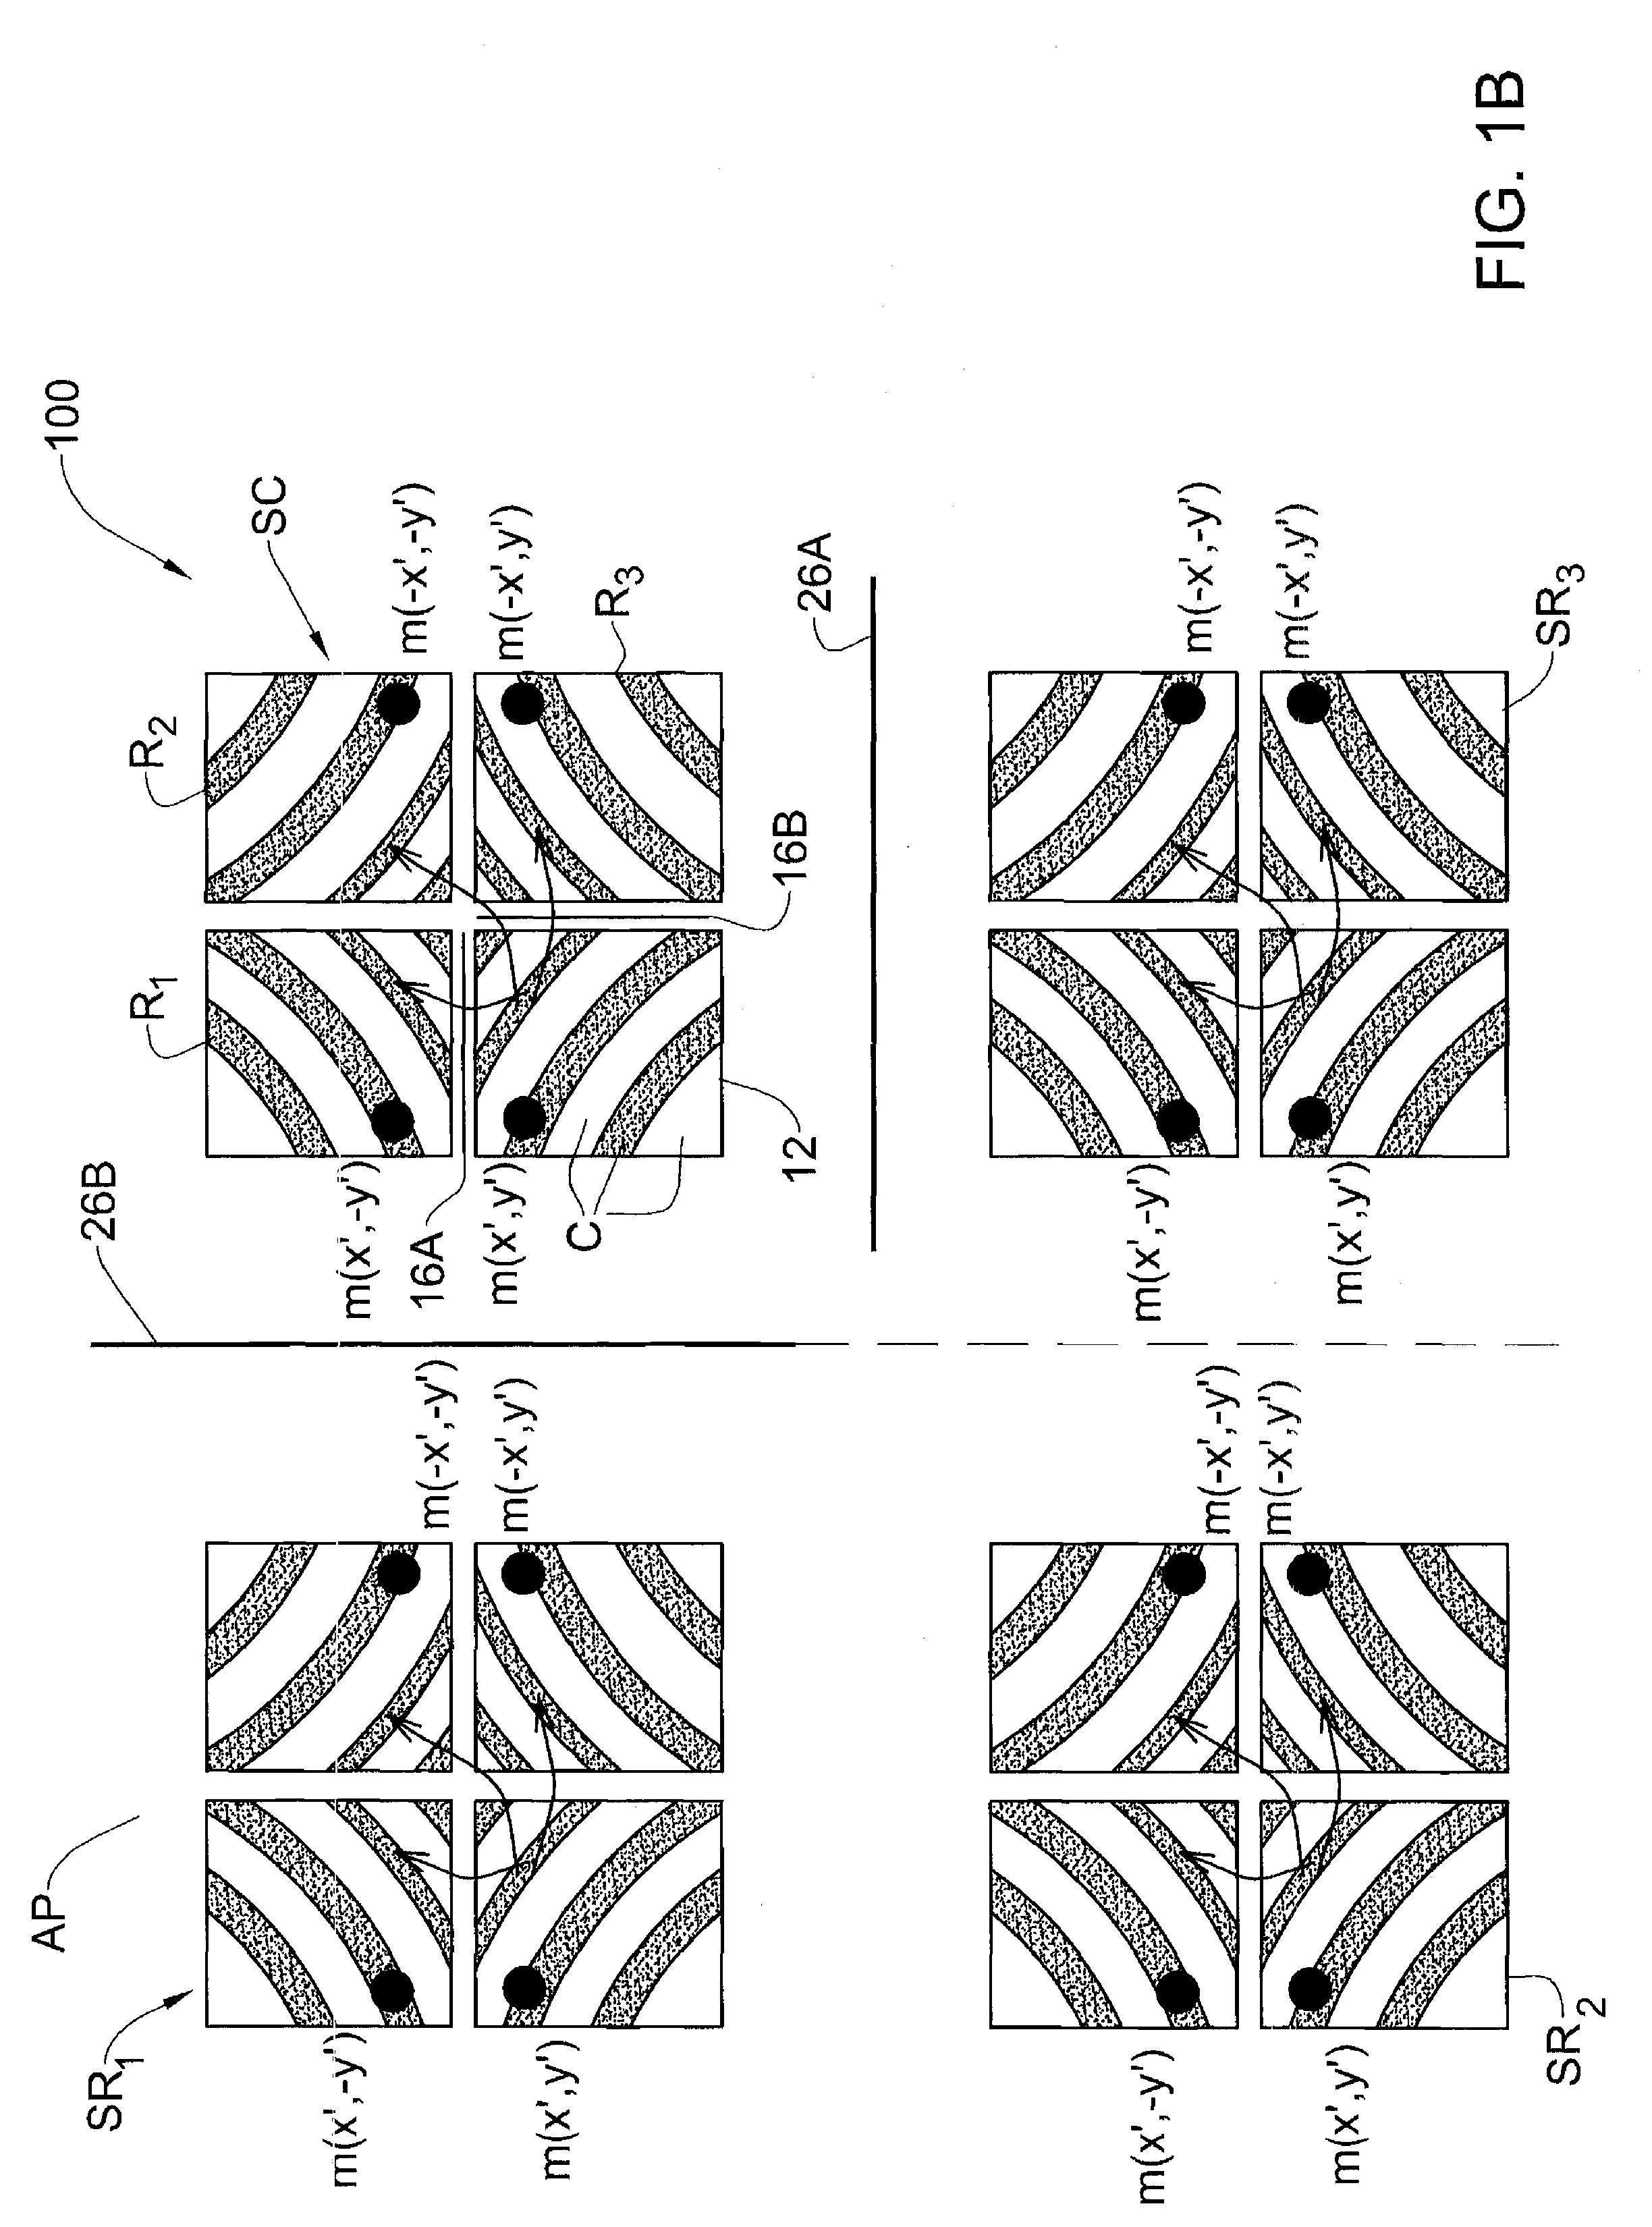 System and method for imaging with extended depth of focus and incoherent light